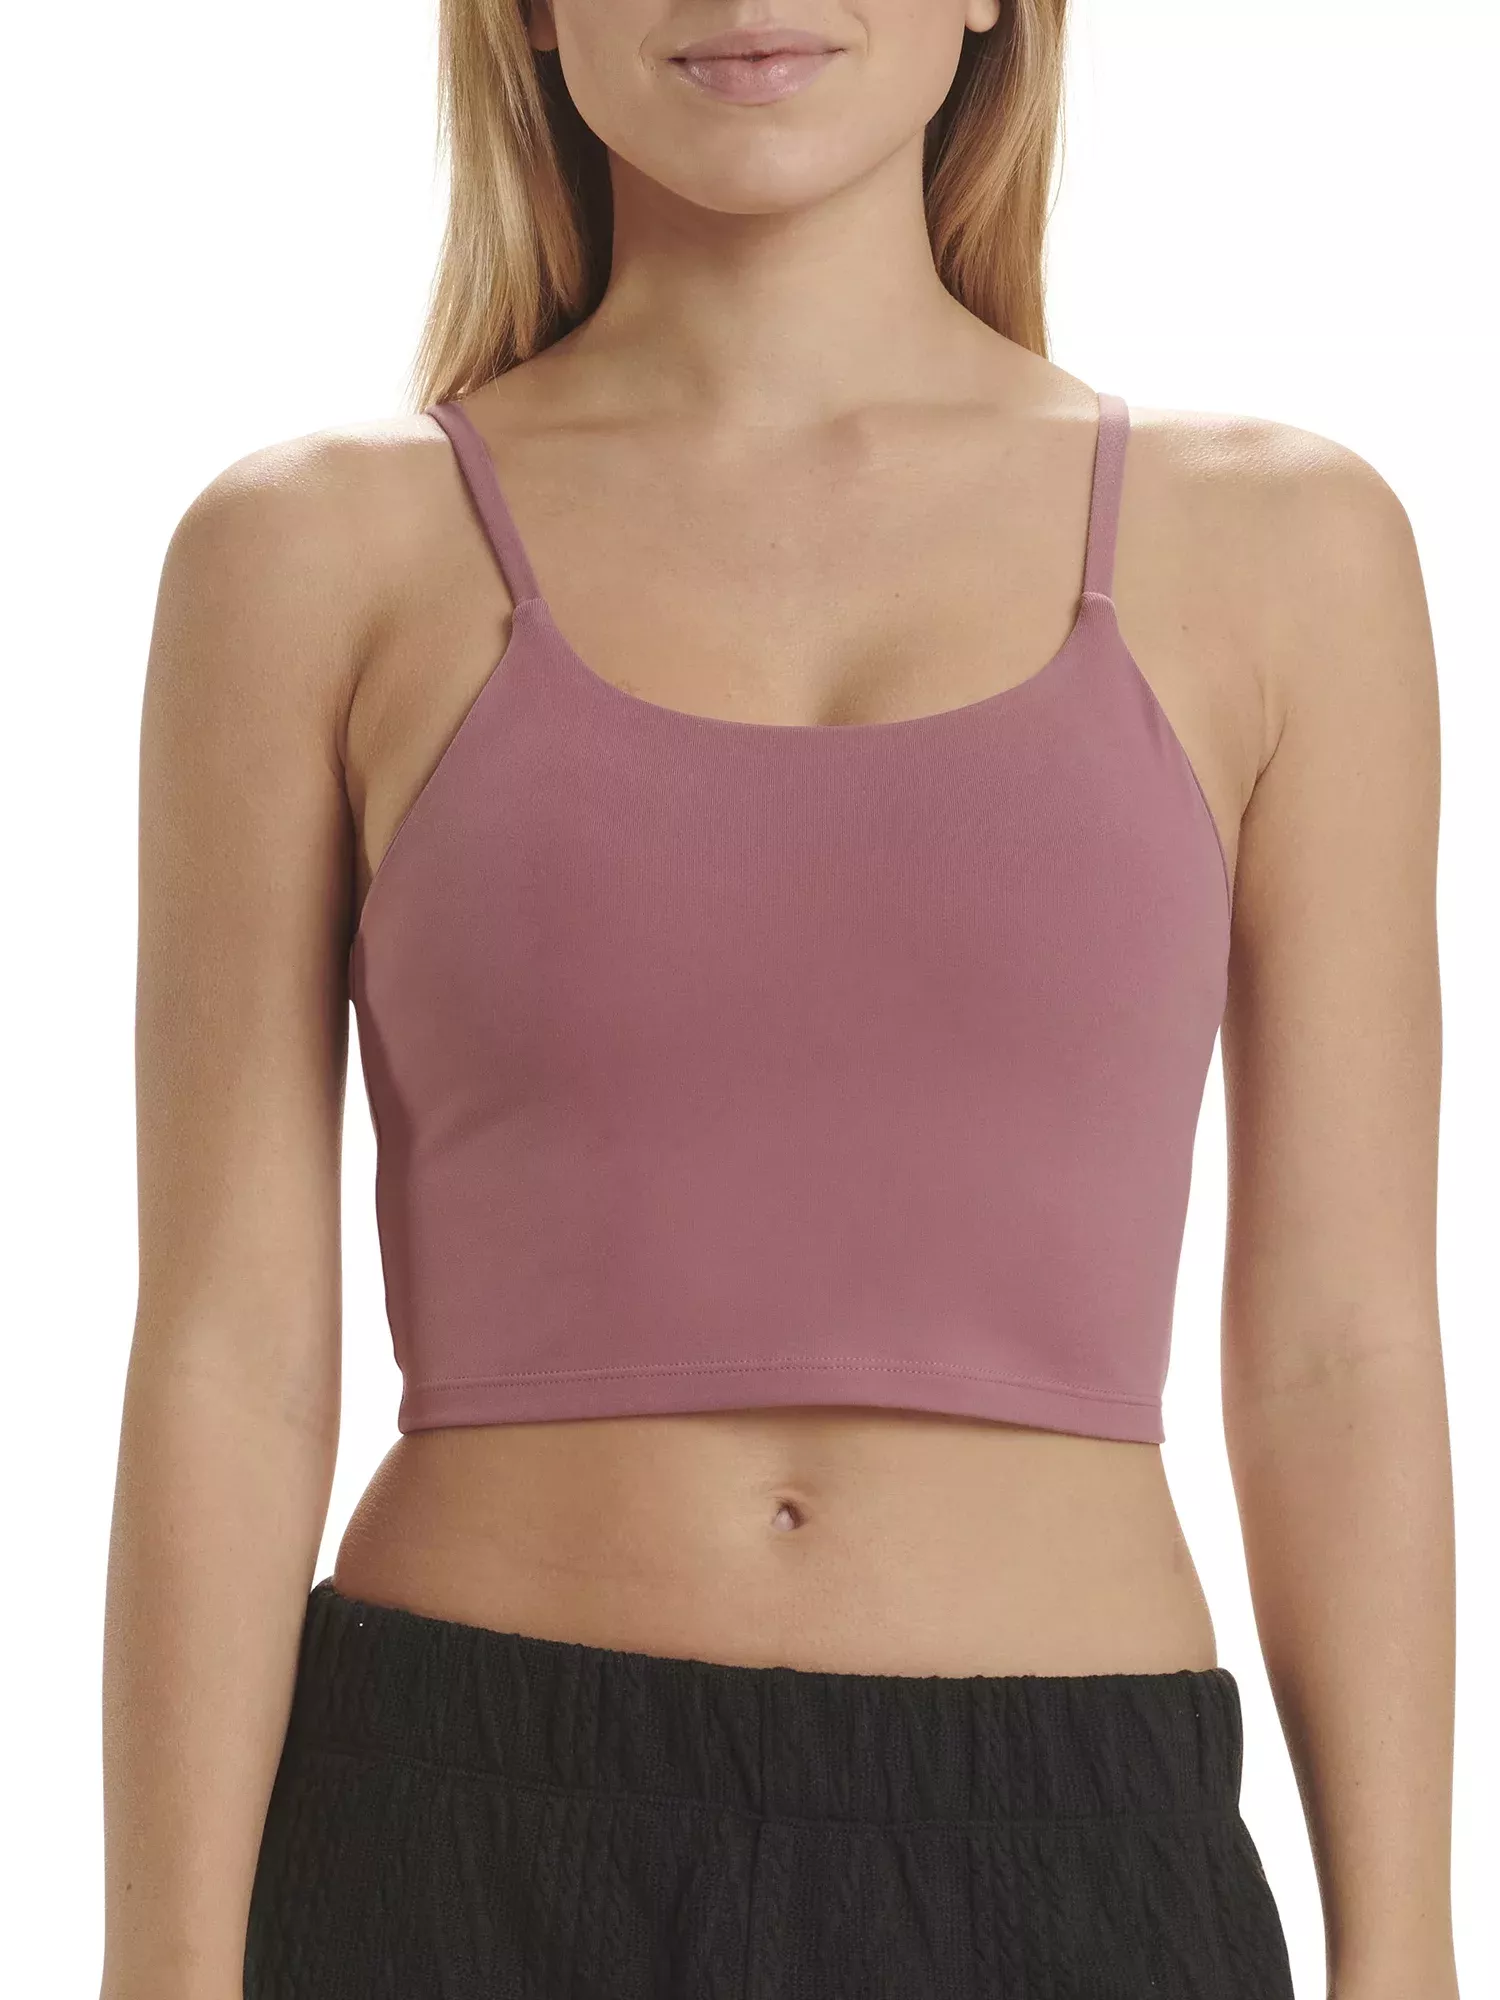 Avia Low Impact Sports Crop with Shelf Bra and Removable Pads 